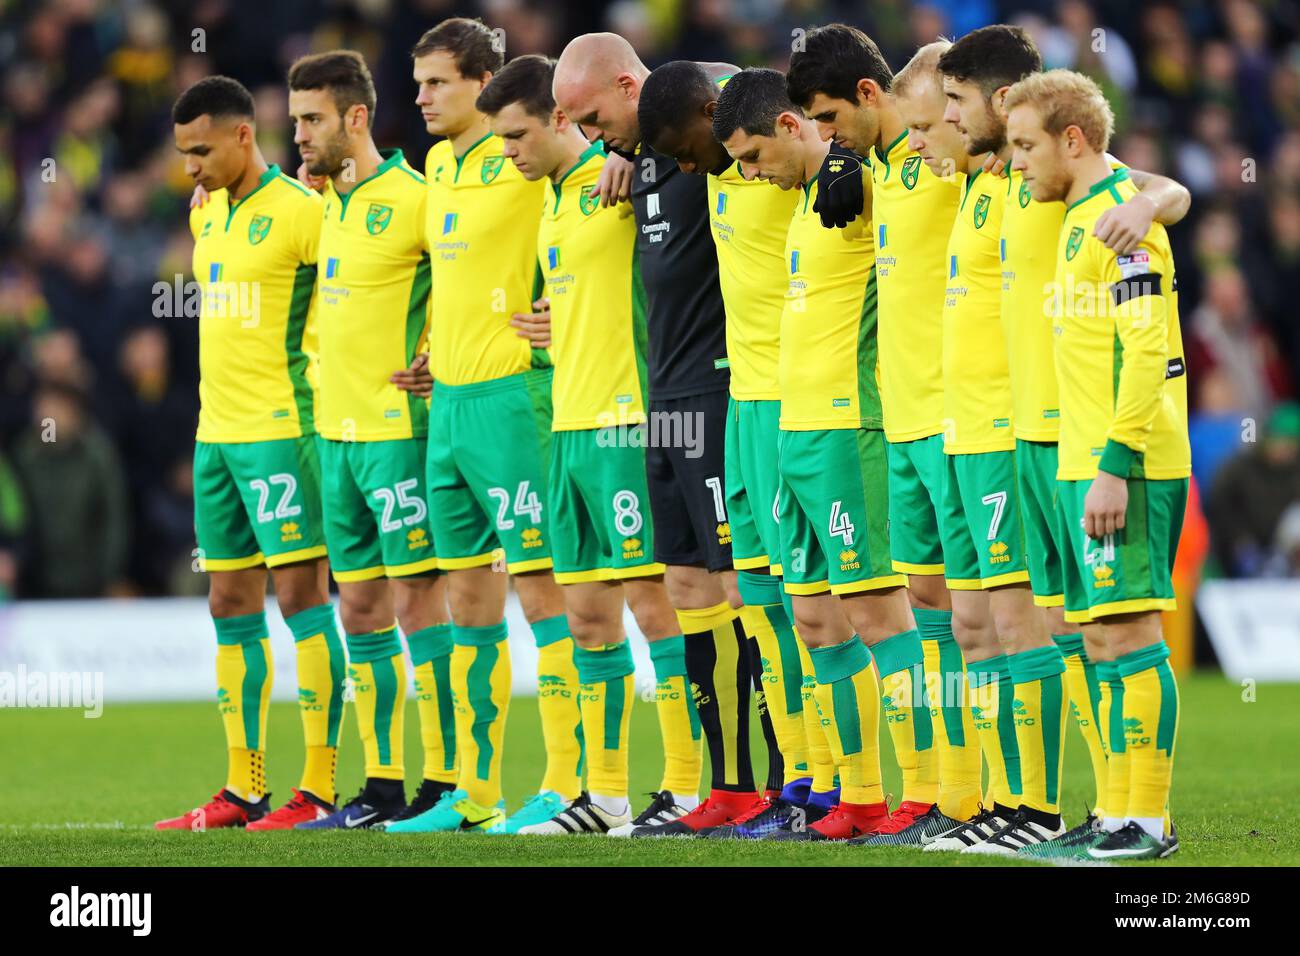 Players of Norwich City observe a moment of silence for those lost in the Chapecoense plane crash - Norwich City v Brentford, Sky Bet Championship, Carrow Road, Norwich - 3rd December 2016. Stock Photo